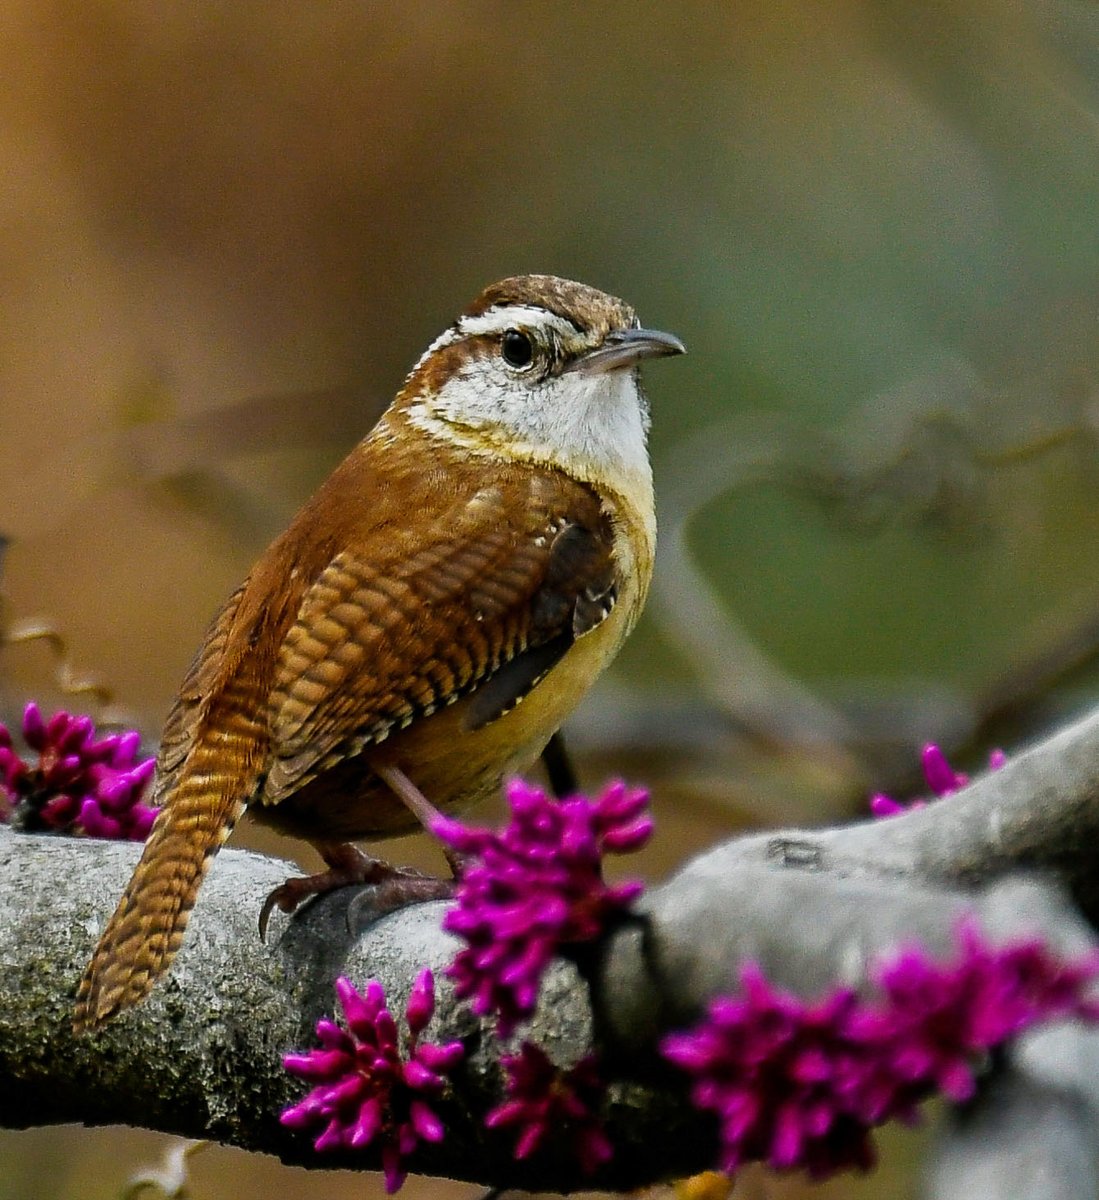 The Birdathon is on! It's a joy to go out in nature and count birds for a great cause. We appreciate everyone who has contributed to our team and thank YOU for your generosity! give.natureforward.org/team/578859 Pictured is a Carolina Wren on a Redbud tree. Photo by Jane Gamble.